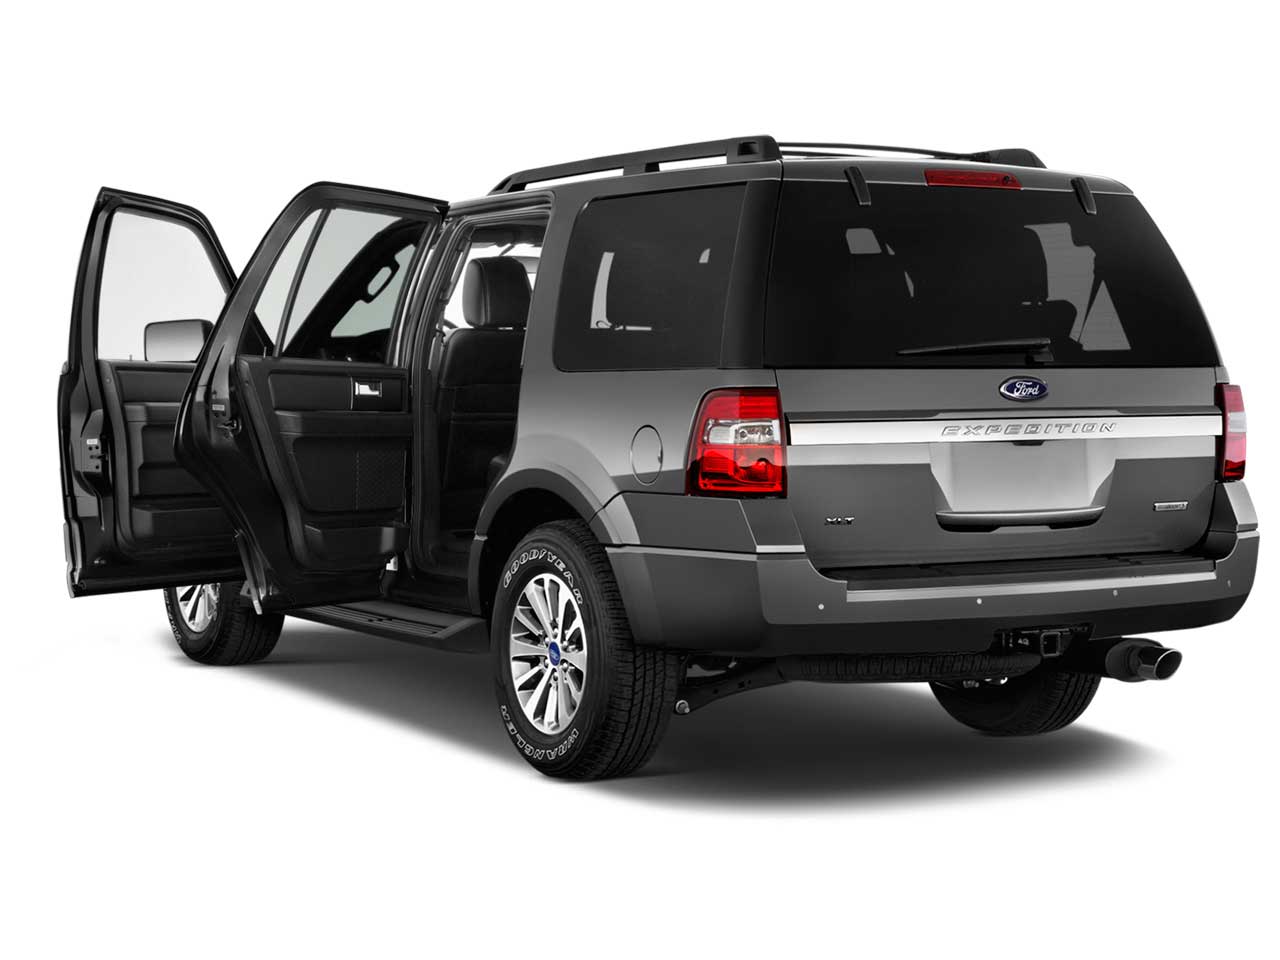 Ford Expedition King Ranch Exterior rear cross view